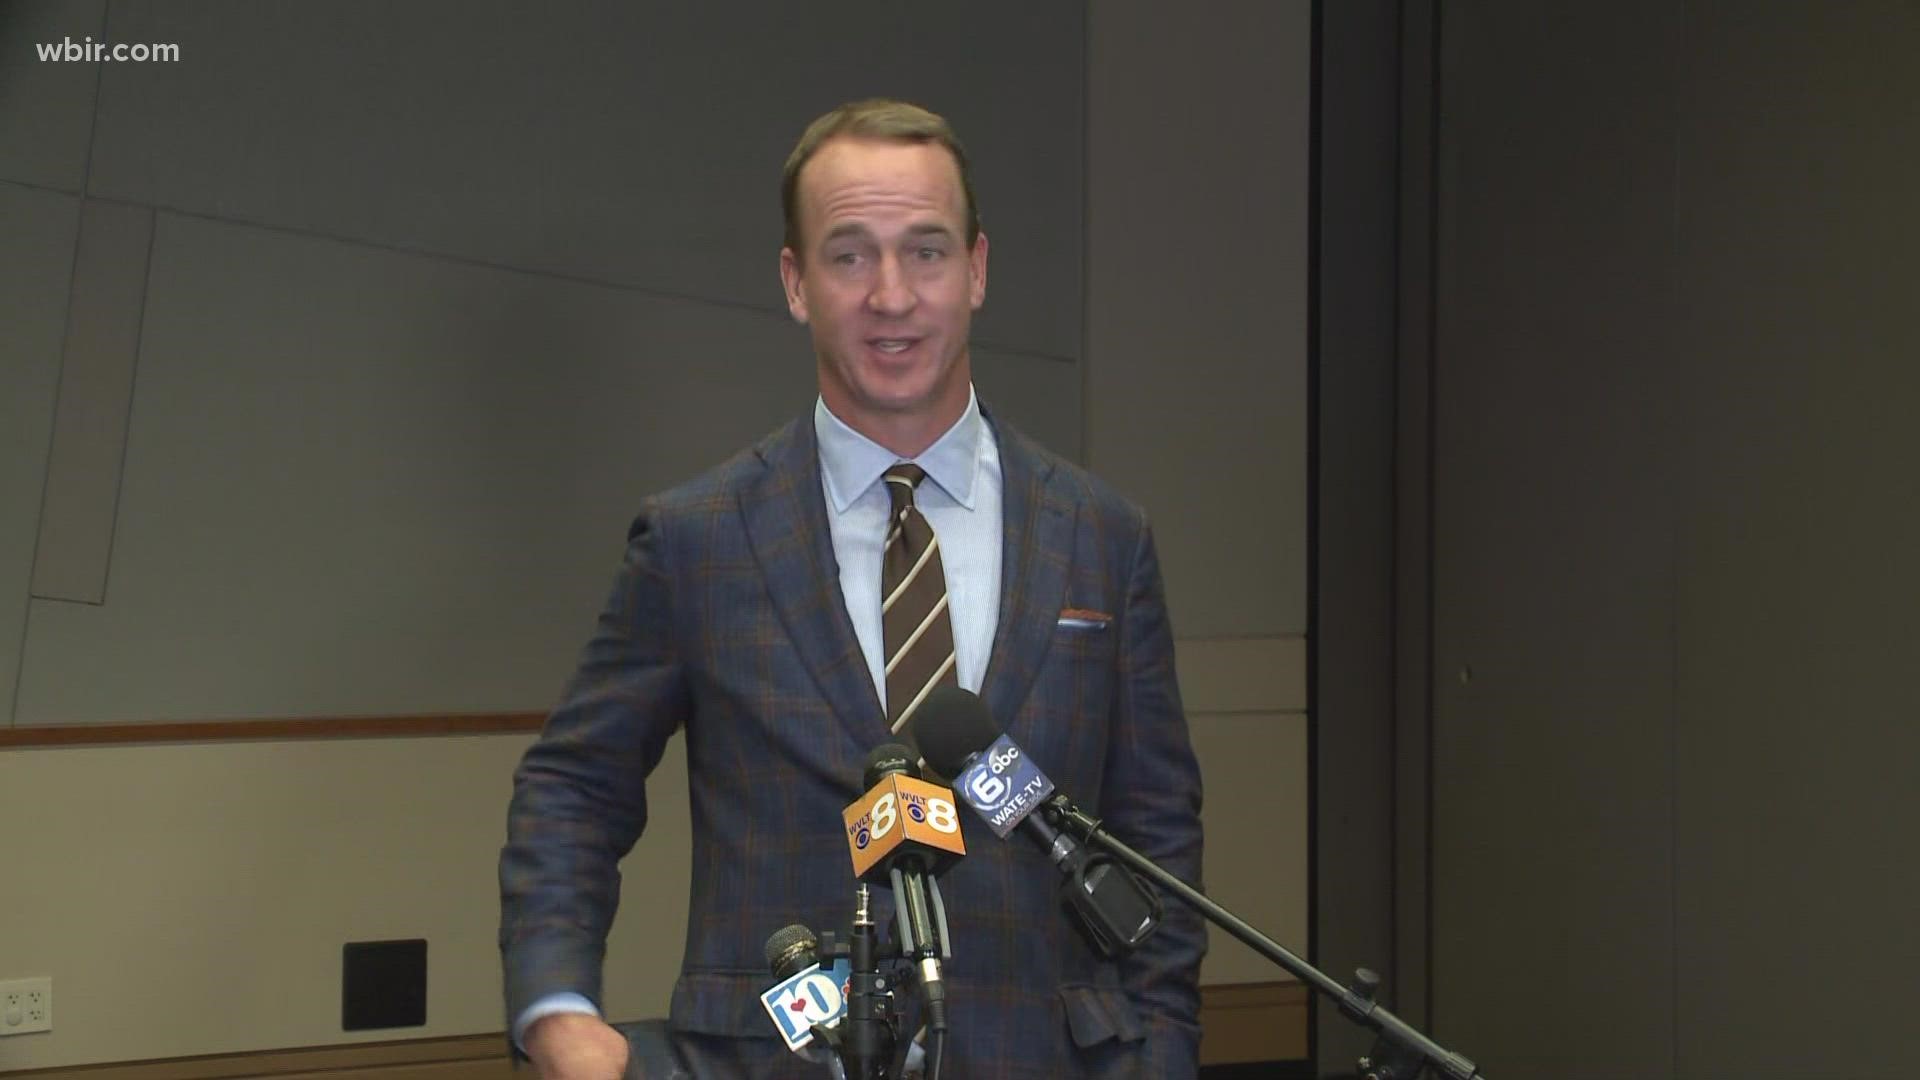 Peyton Manning is in Knoxville at the Greater Knoxville Sports Hall of Fame.